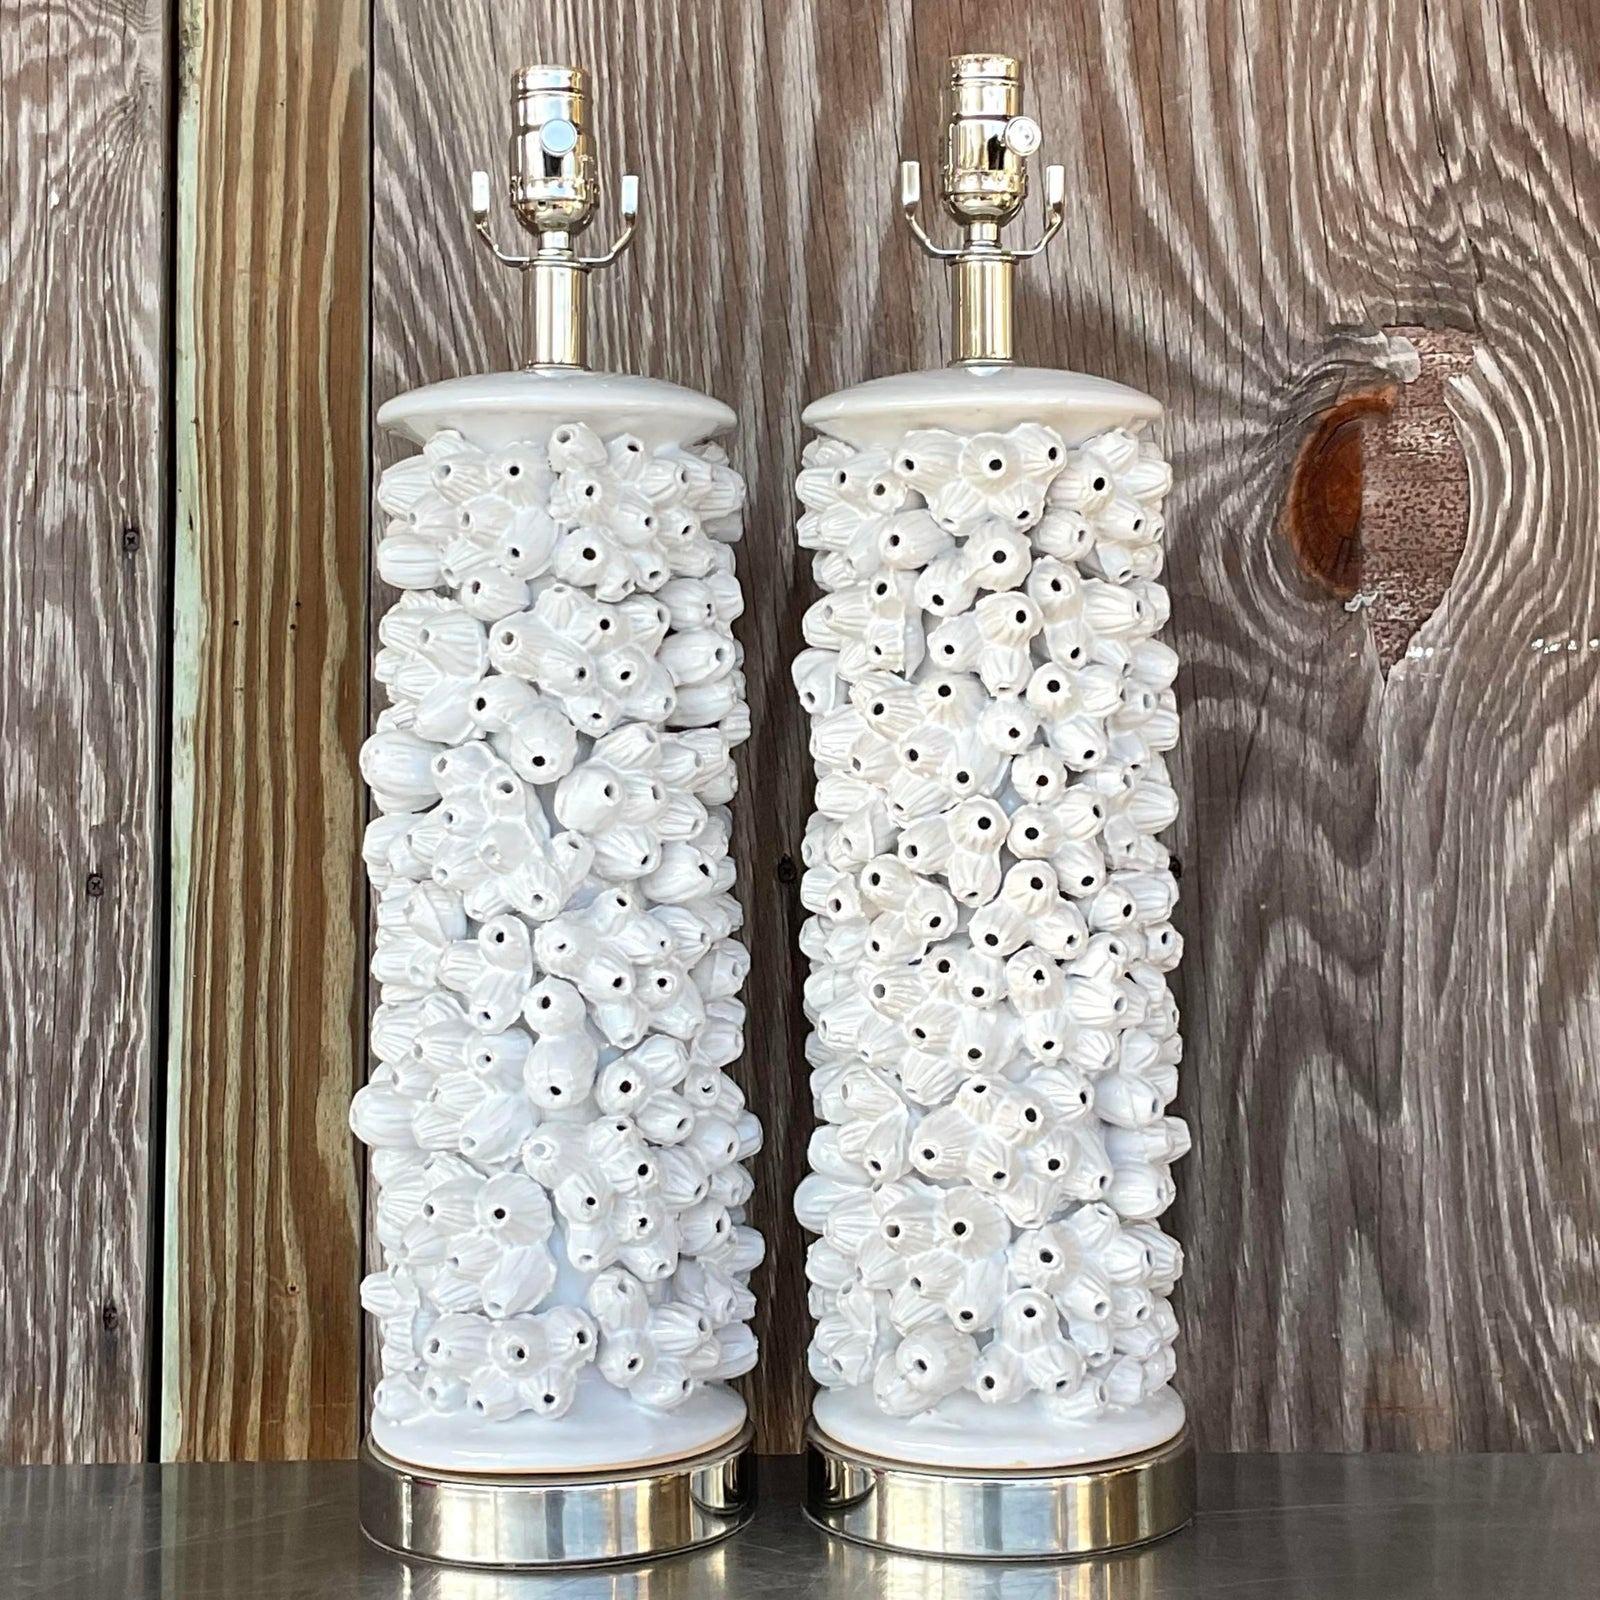 A fabulous pair of vintage Coastal table lamps. A chic barnacle design in a glazed ceramic finish. Acquired from a Palm Beach estate.